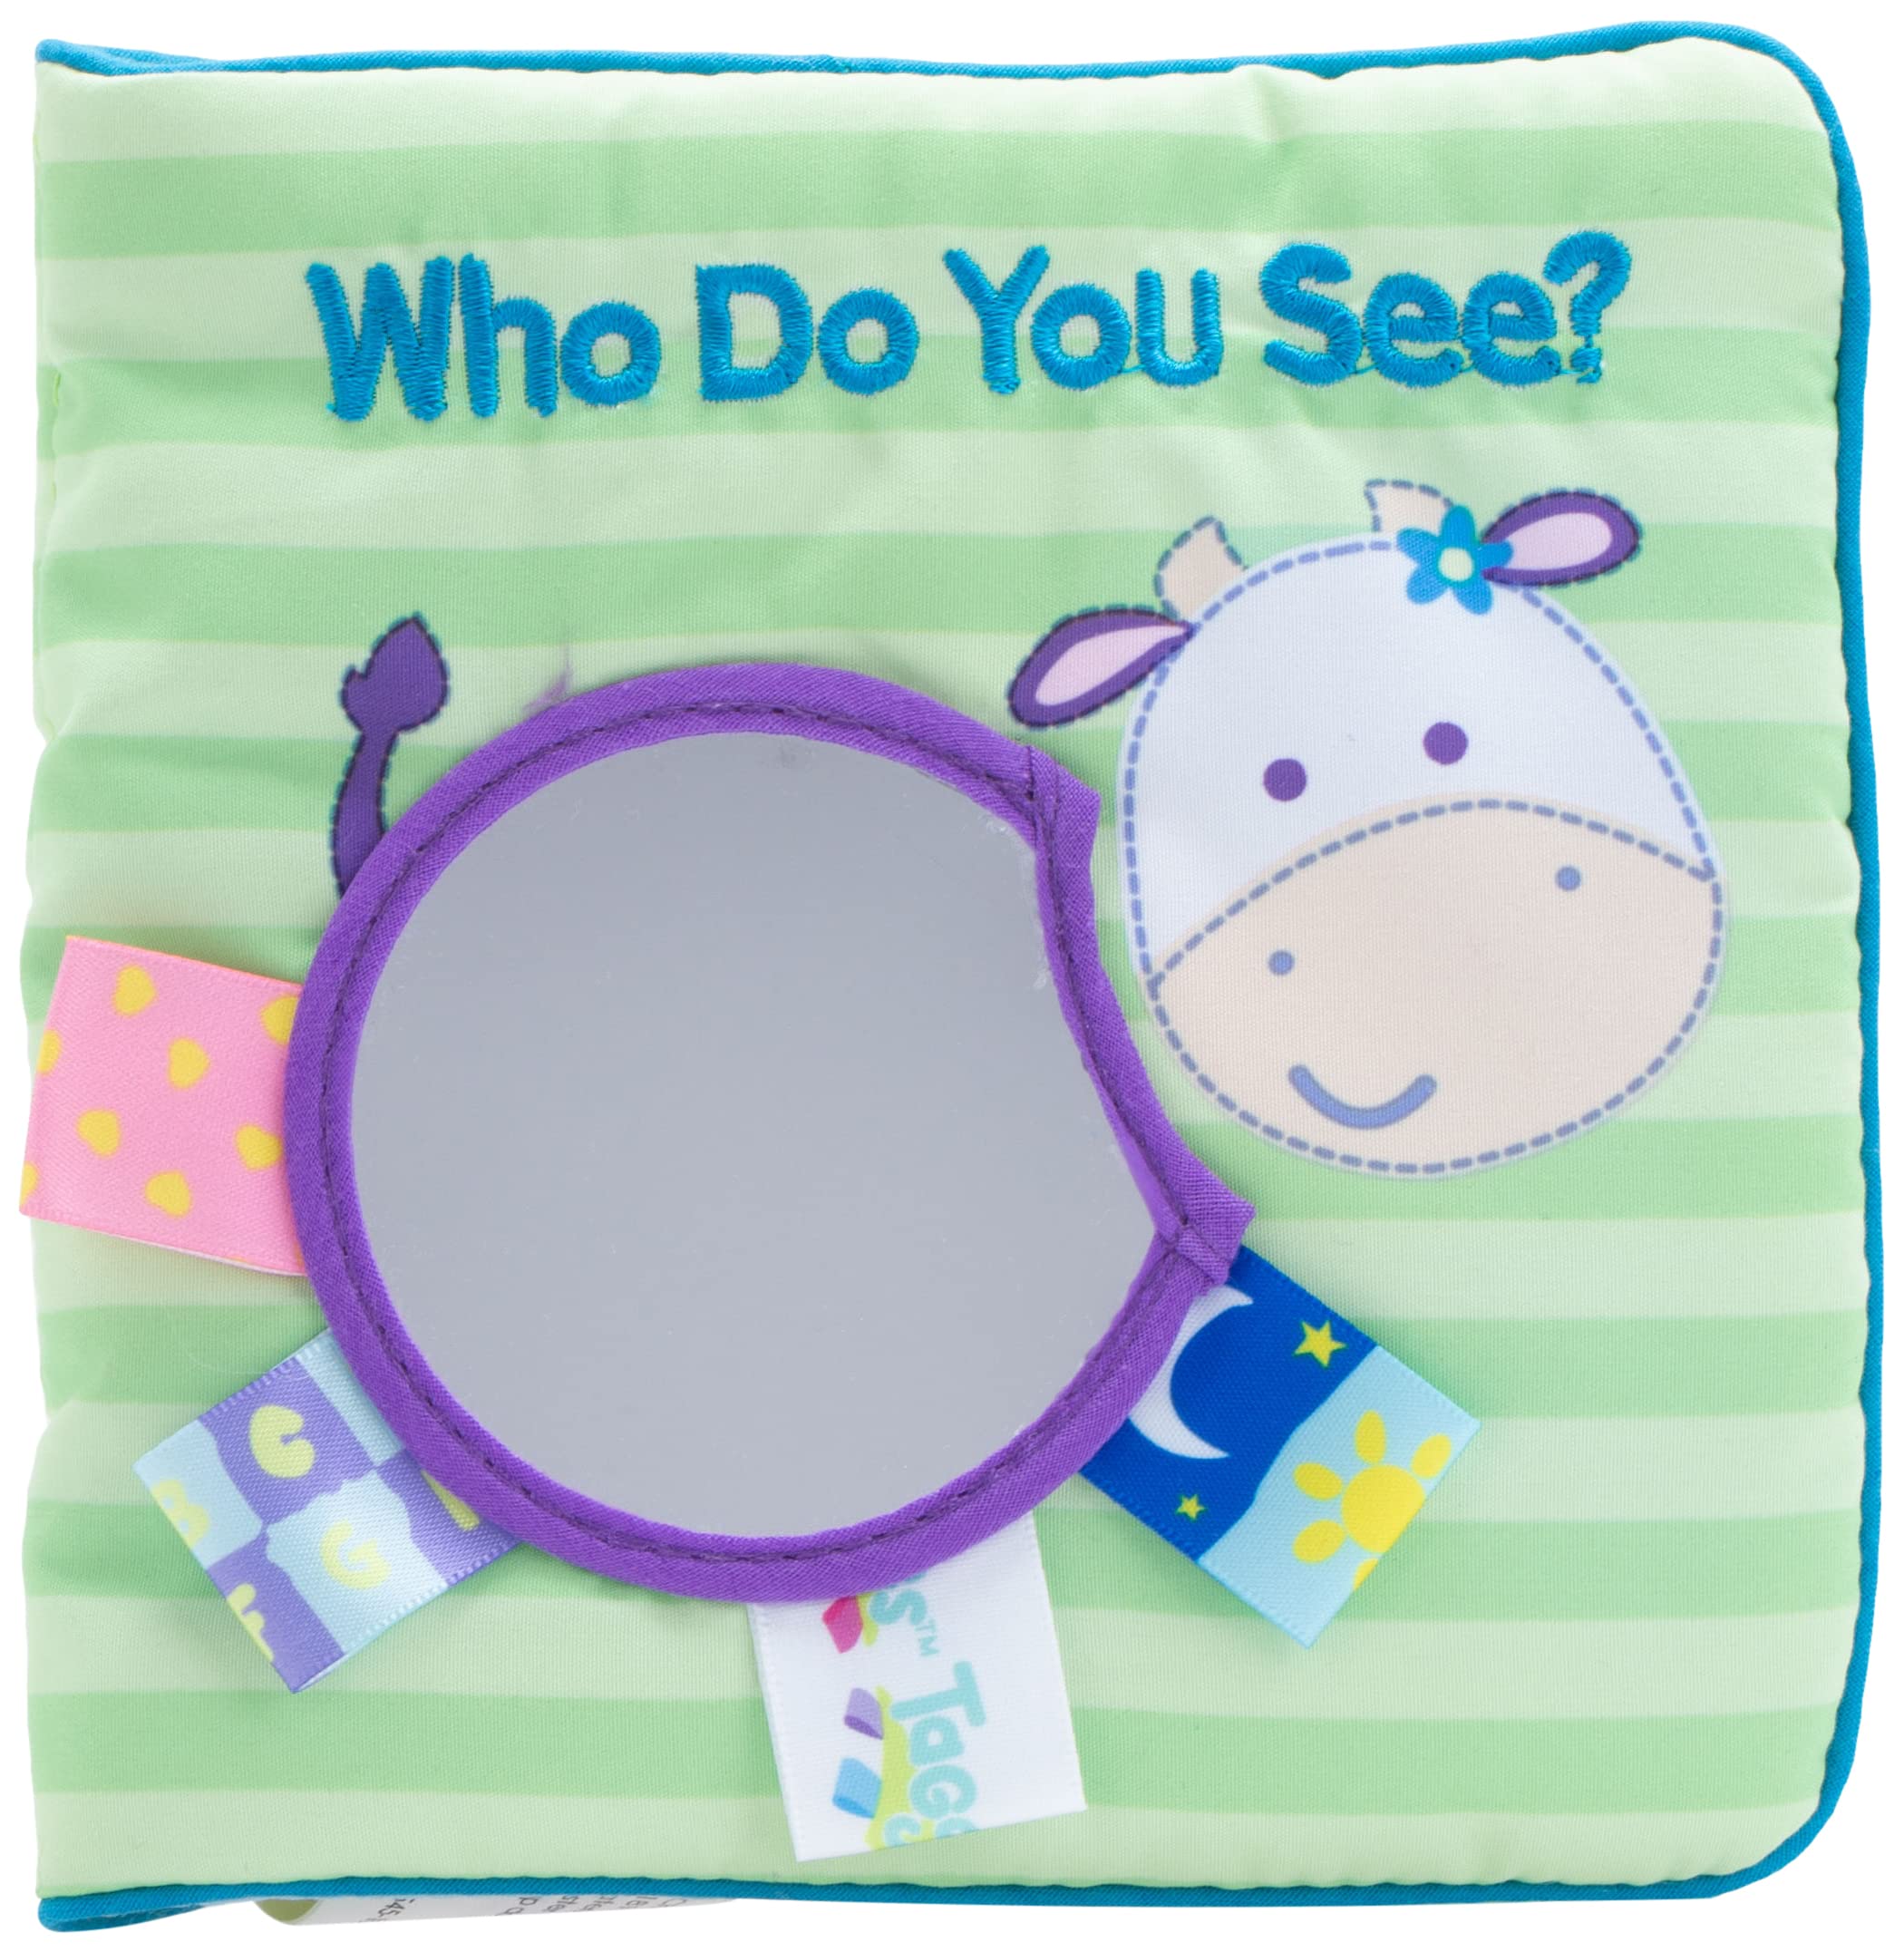 My First Taggies Book: Who Do You See?